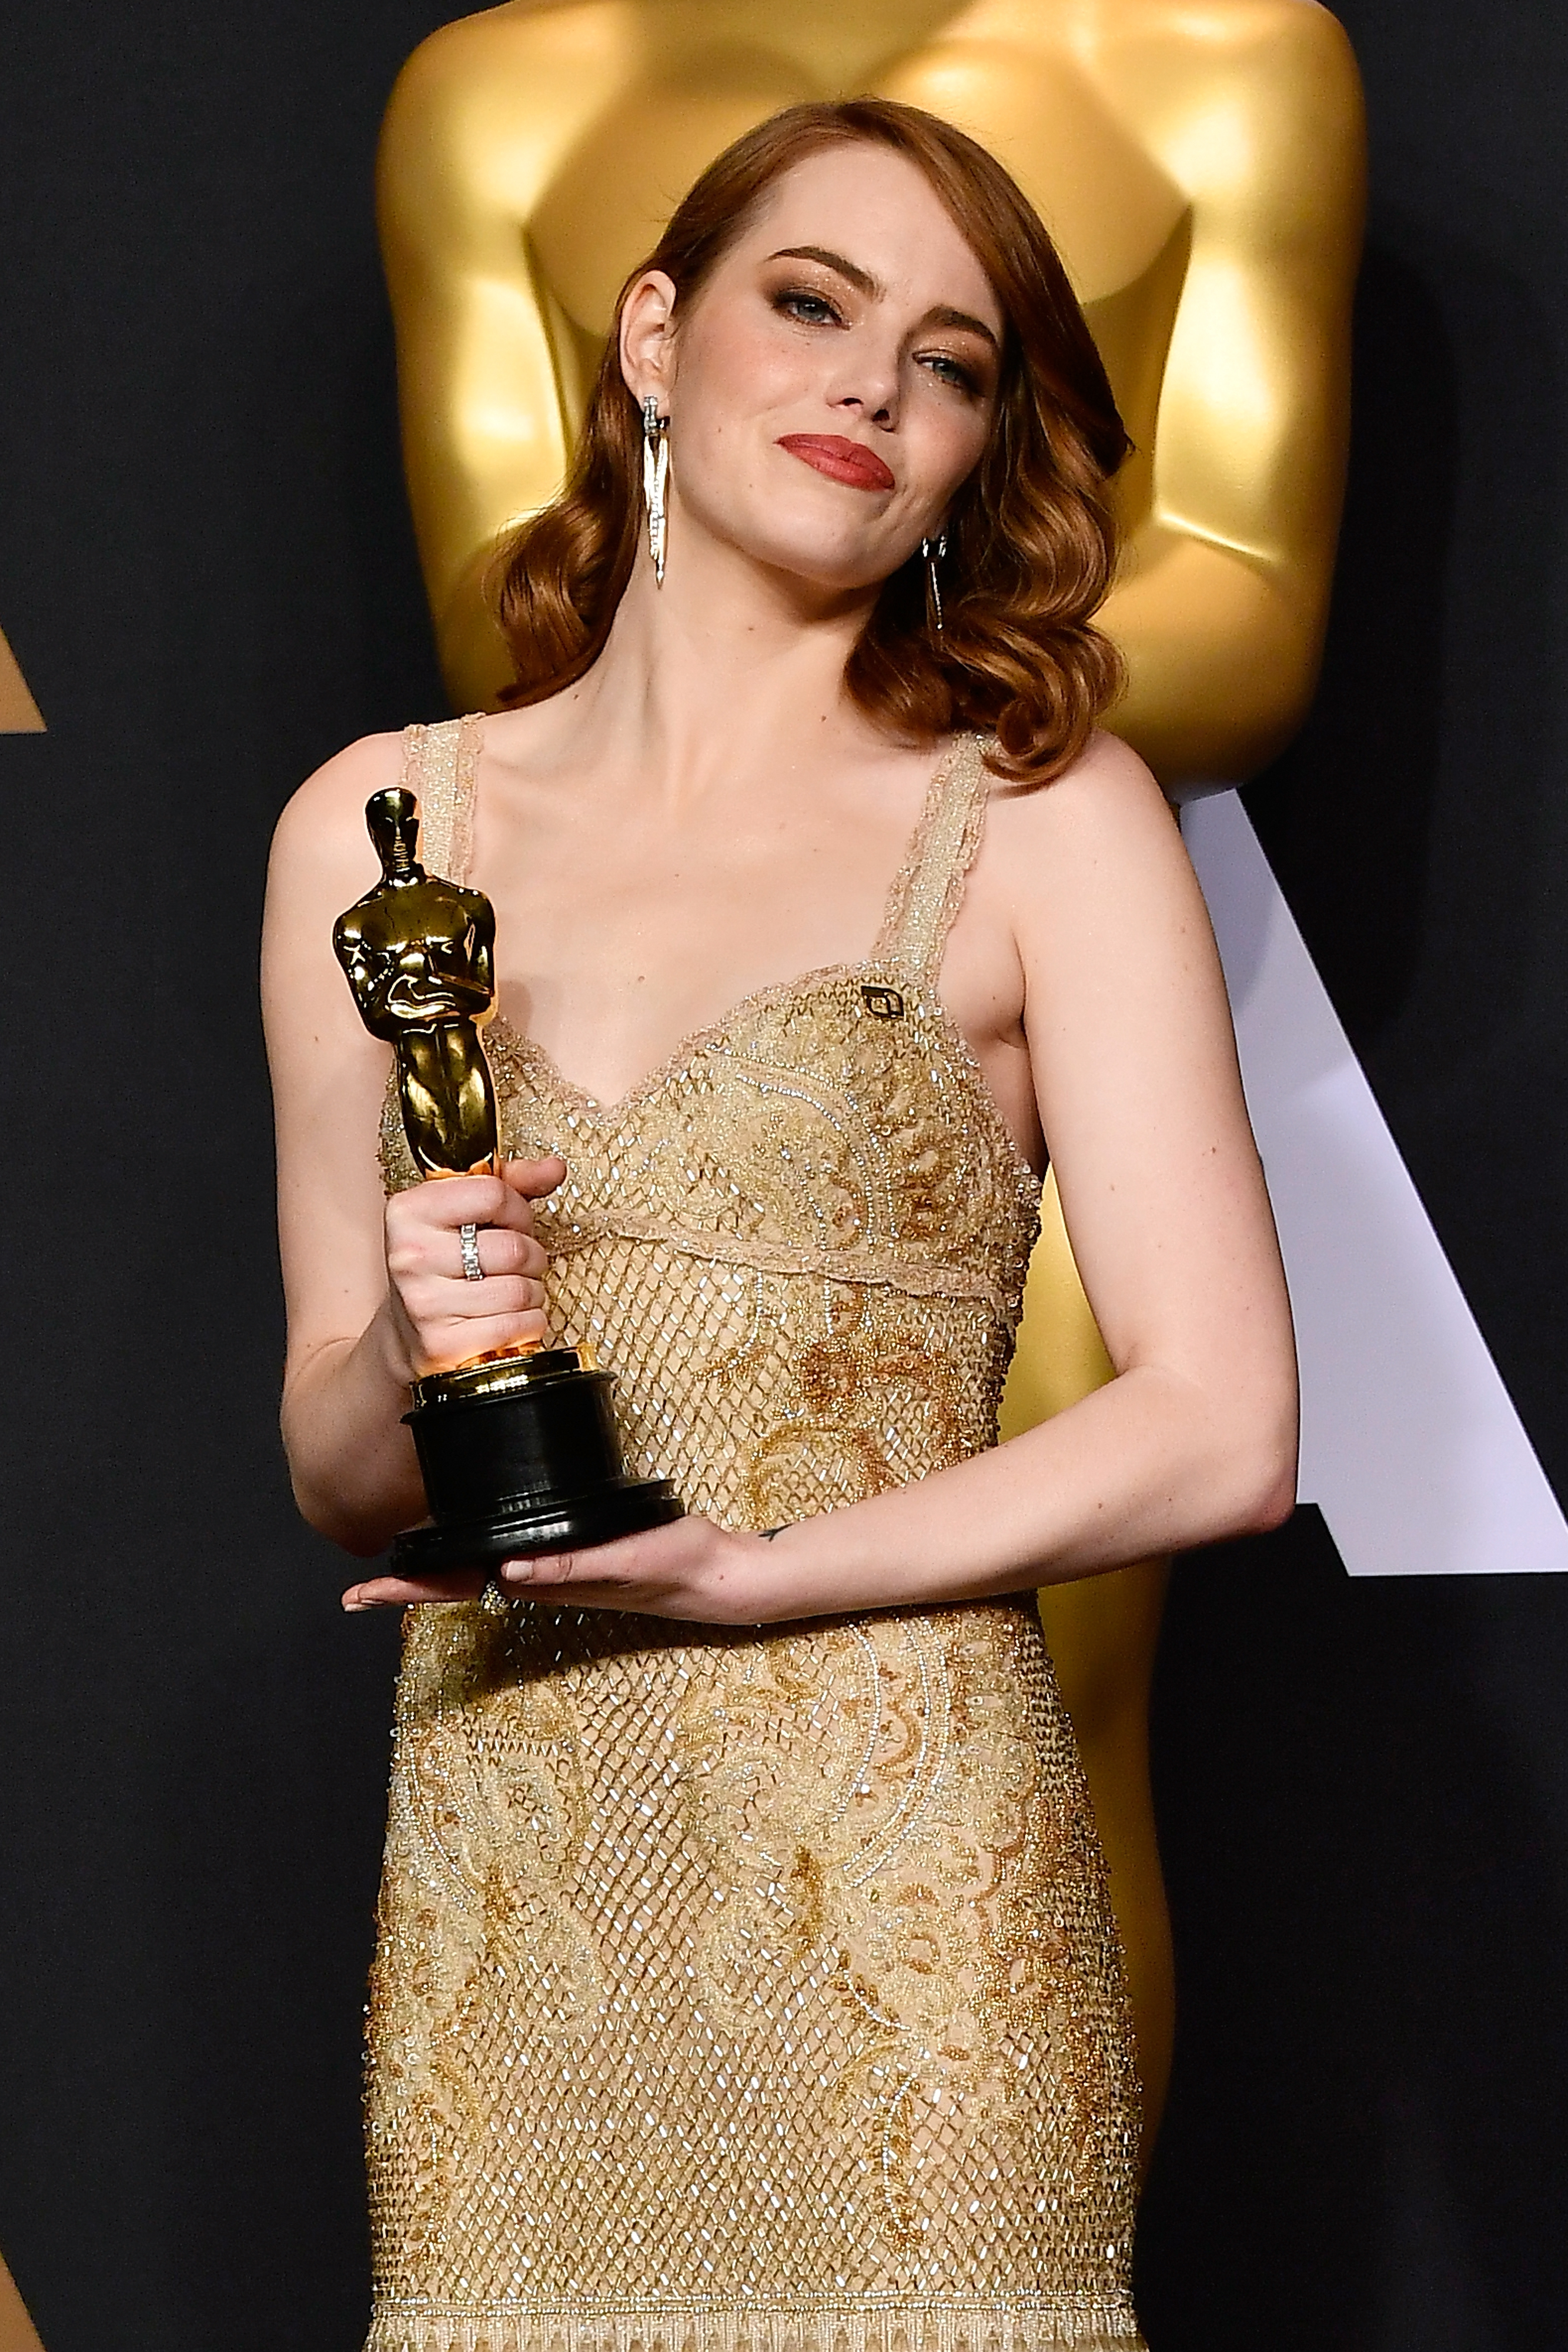 HOLLYWOOD, CA - FEBRUARY 26: Actress Emma Stone, winner of Best Actress for 'La La Land' poses in the press room during the 89th Annual Academy Awards at Hollywood & Highland Center on February 26, 2017 in Hollywood, California. Frazer Harrison/Getty Images/AFP